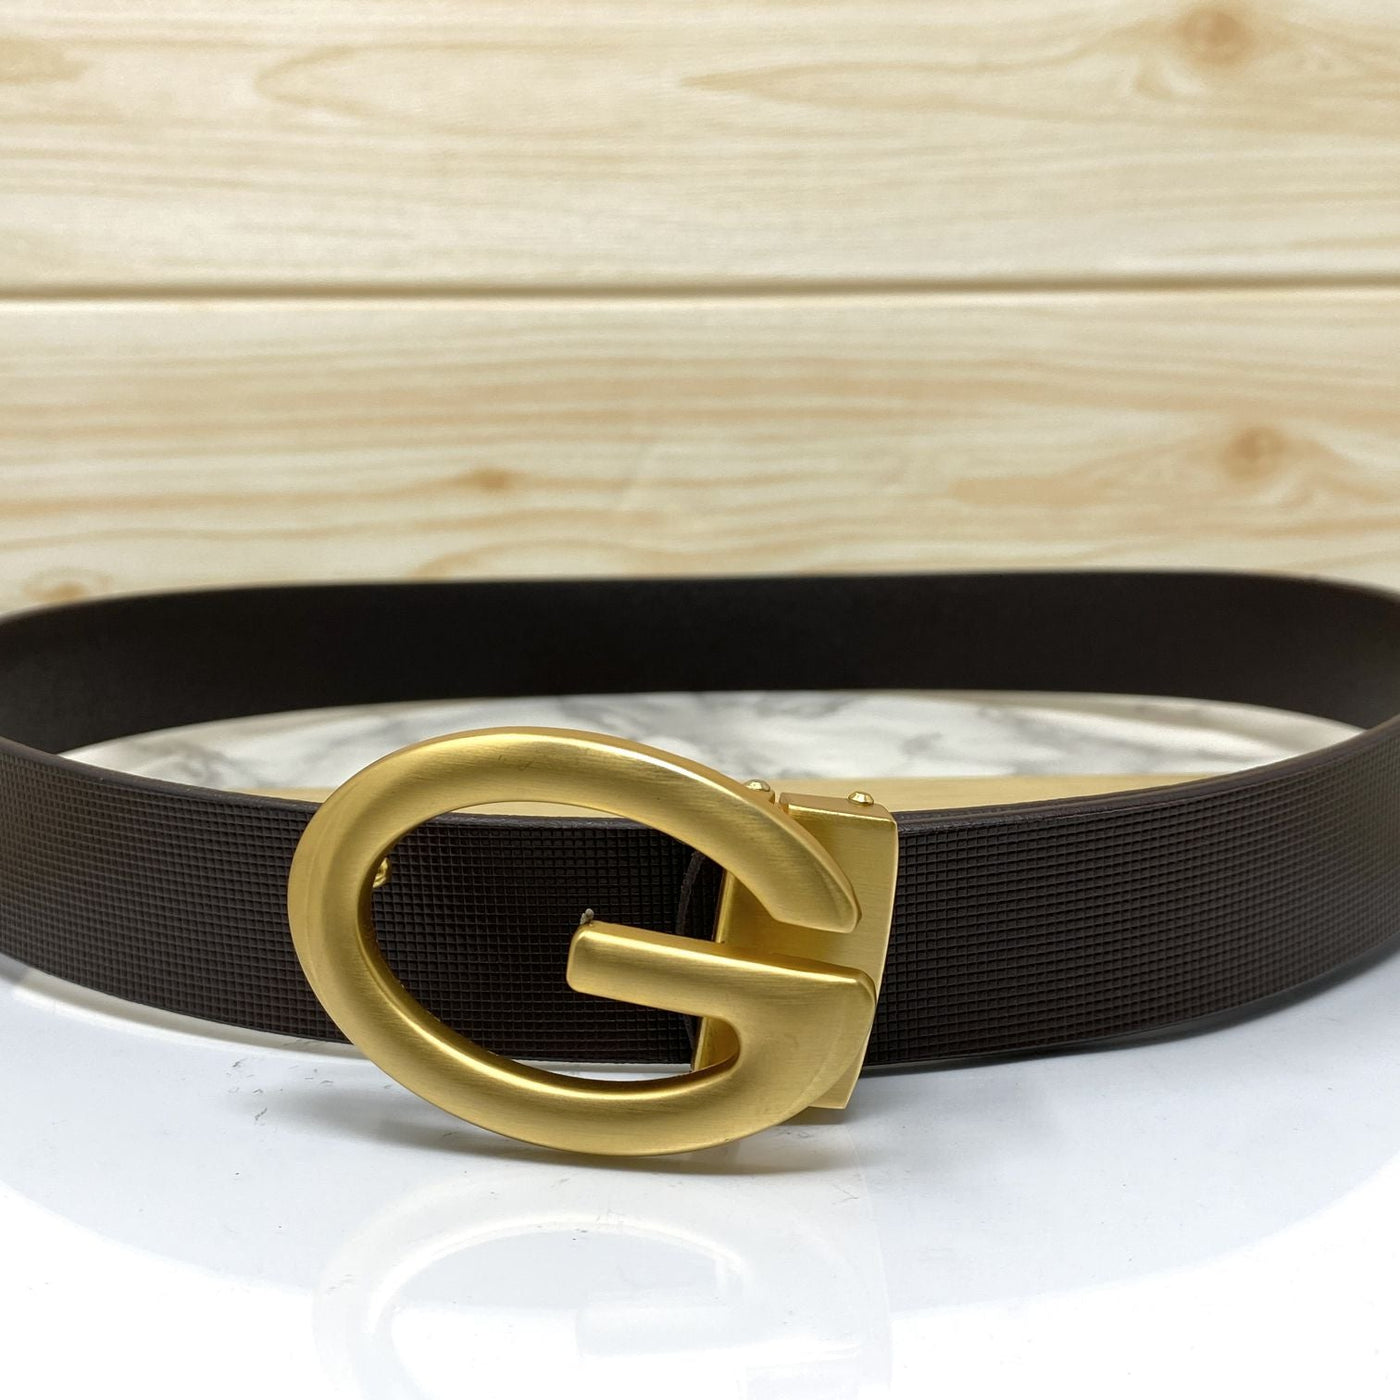 Simple G-Design Formal and Leather Strap Belt-UniqueandClassy